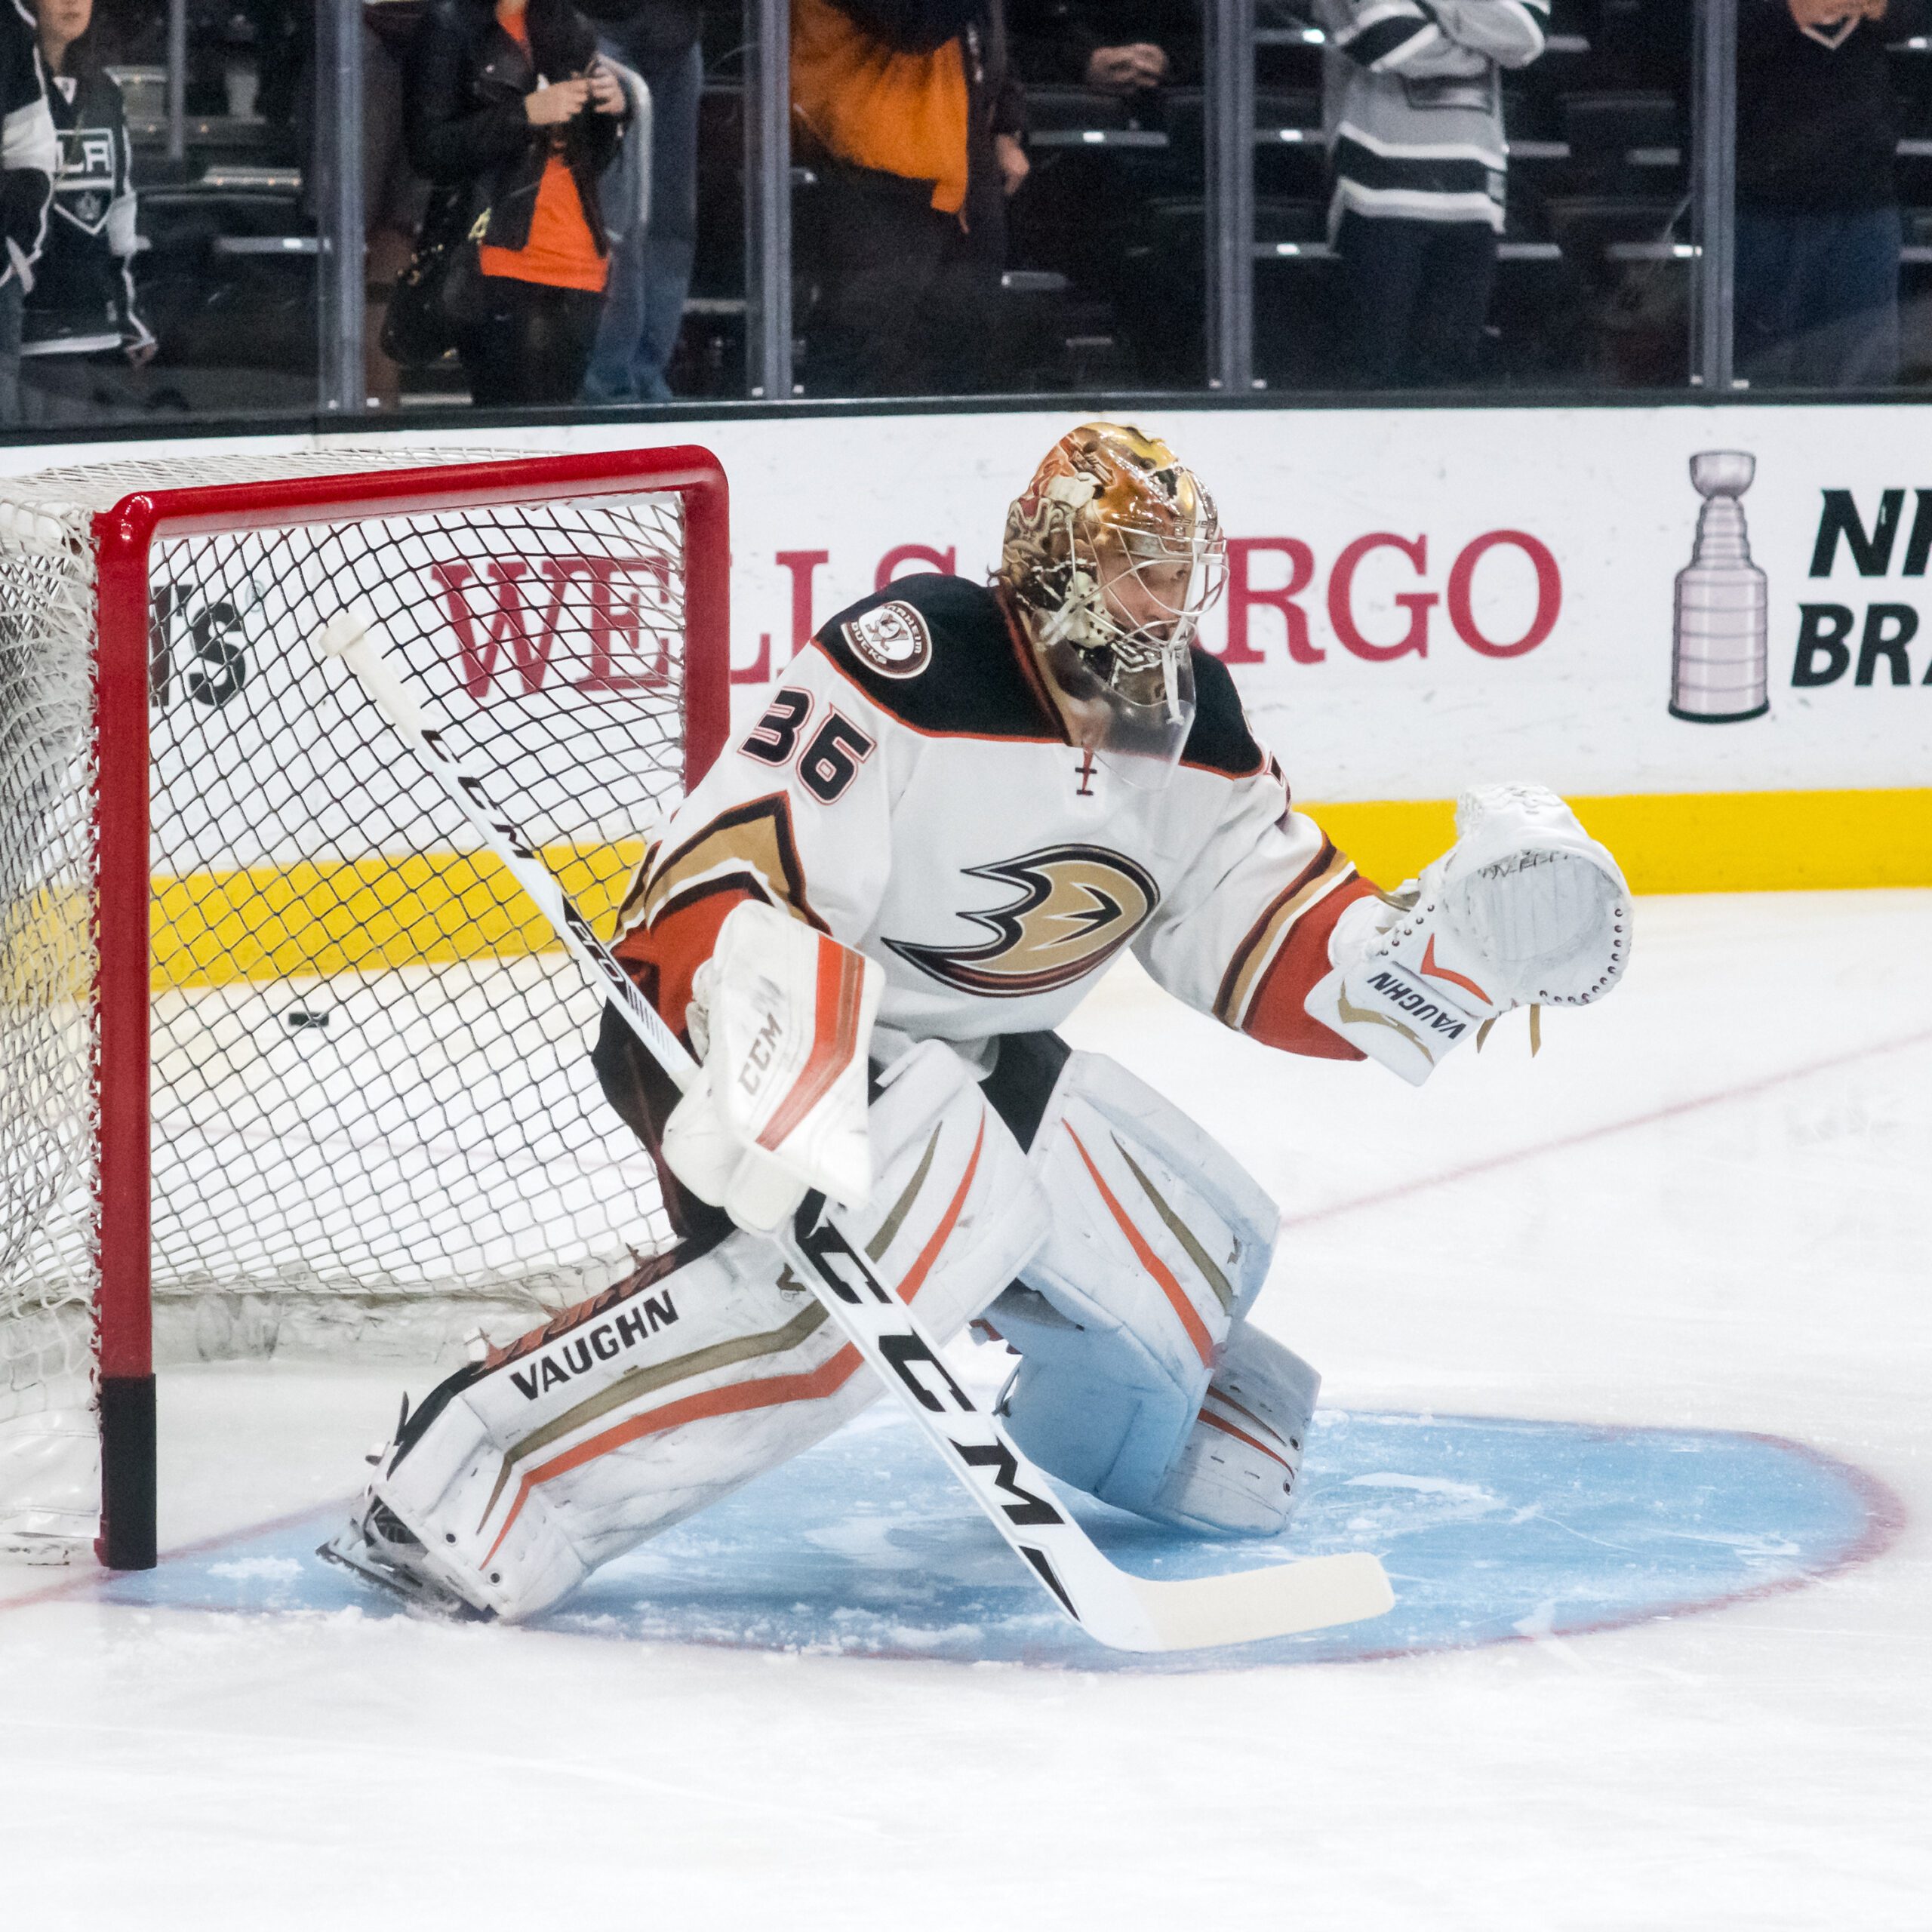 New Jersey Devils: Is John Gibson Or Connor Hellebuyck A Better Option?